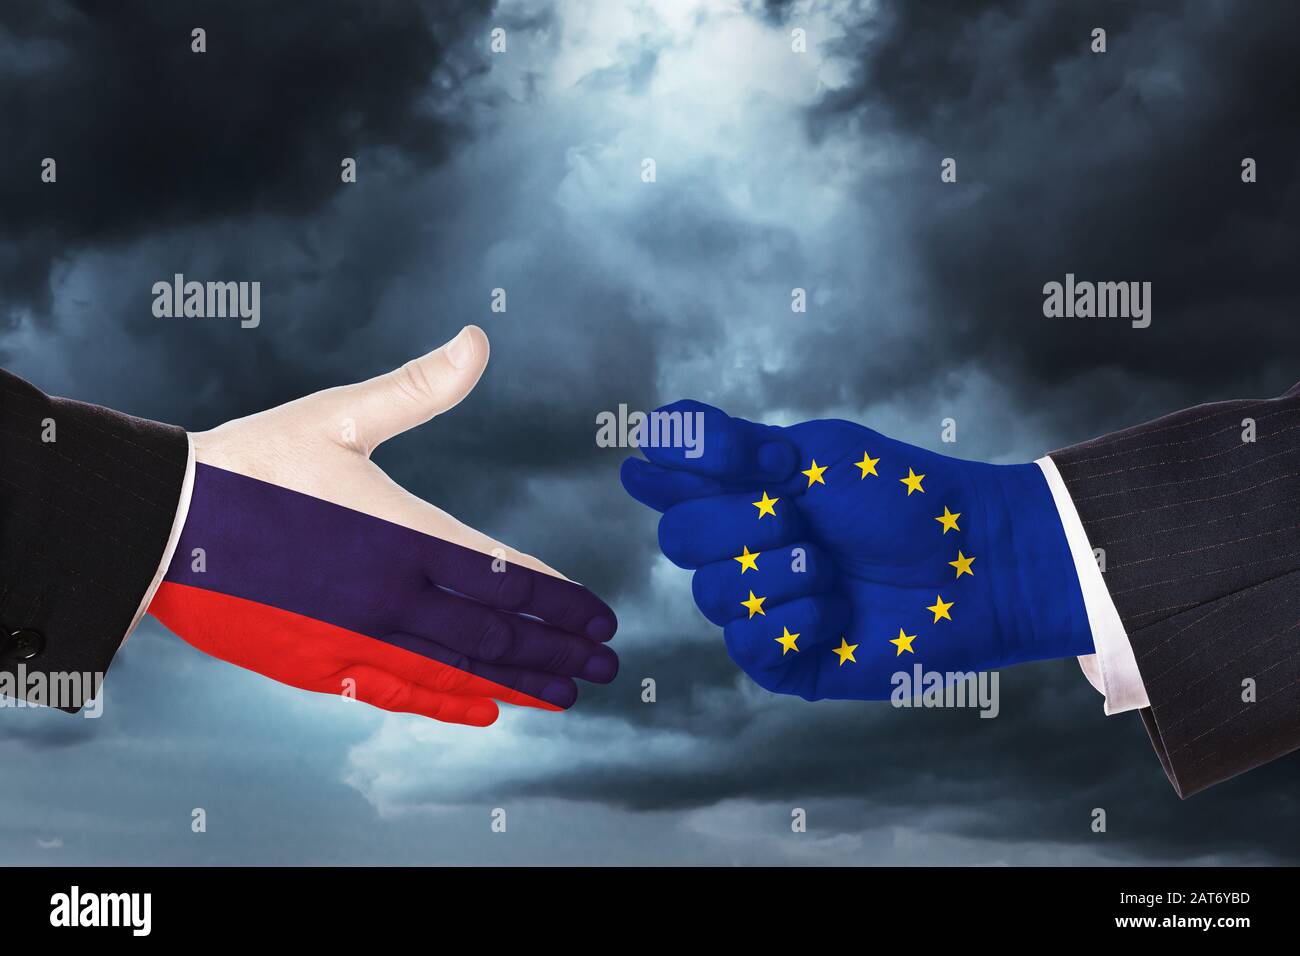 Hands on sky background. Concept on the topic of the proposal of friendship and relations between states Stock Photo